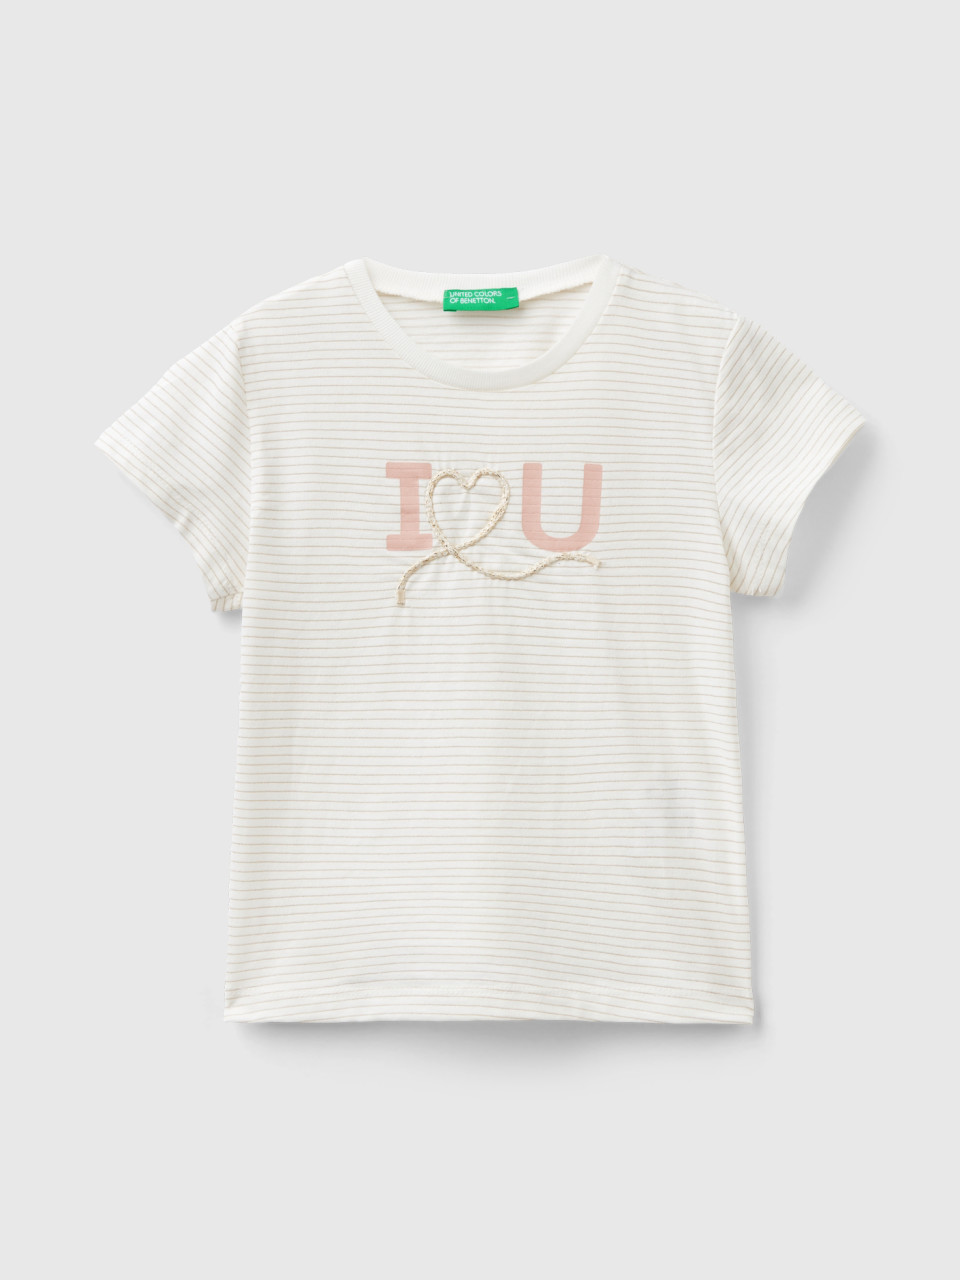 Benetton, T-shirt With Cord Embroidery, Creamy White, Kids